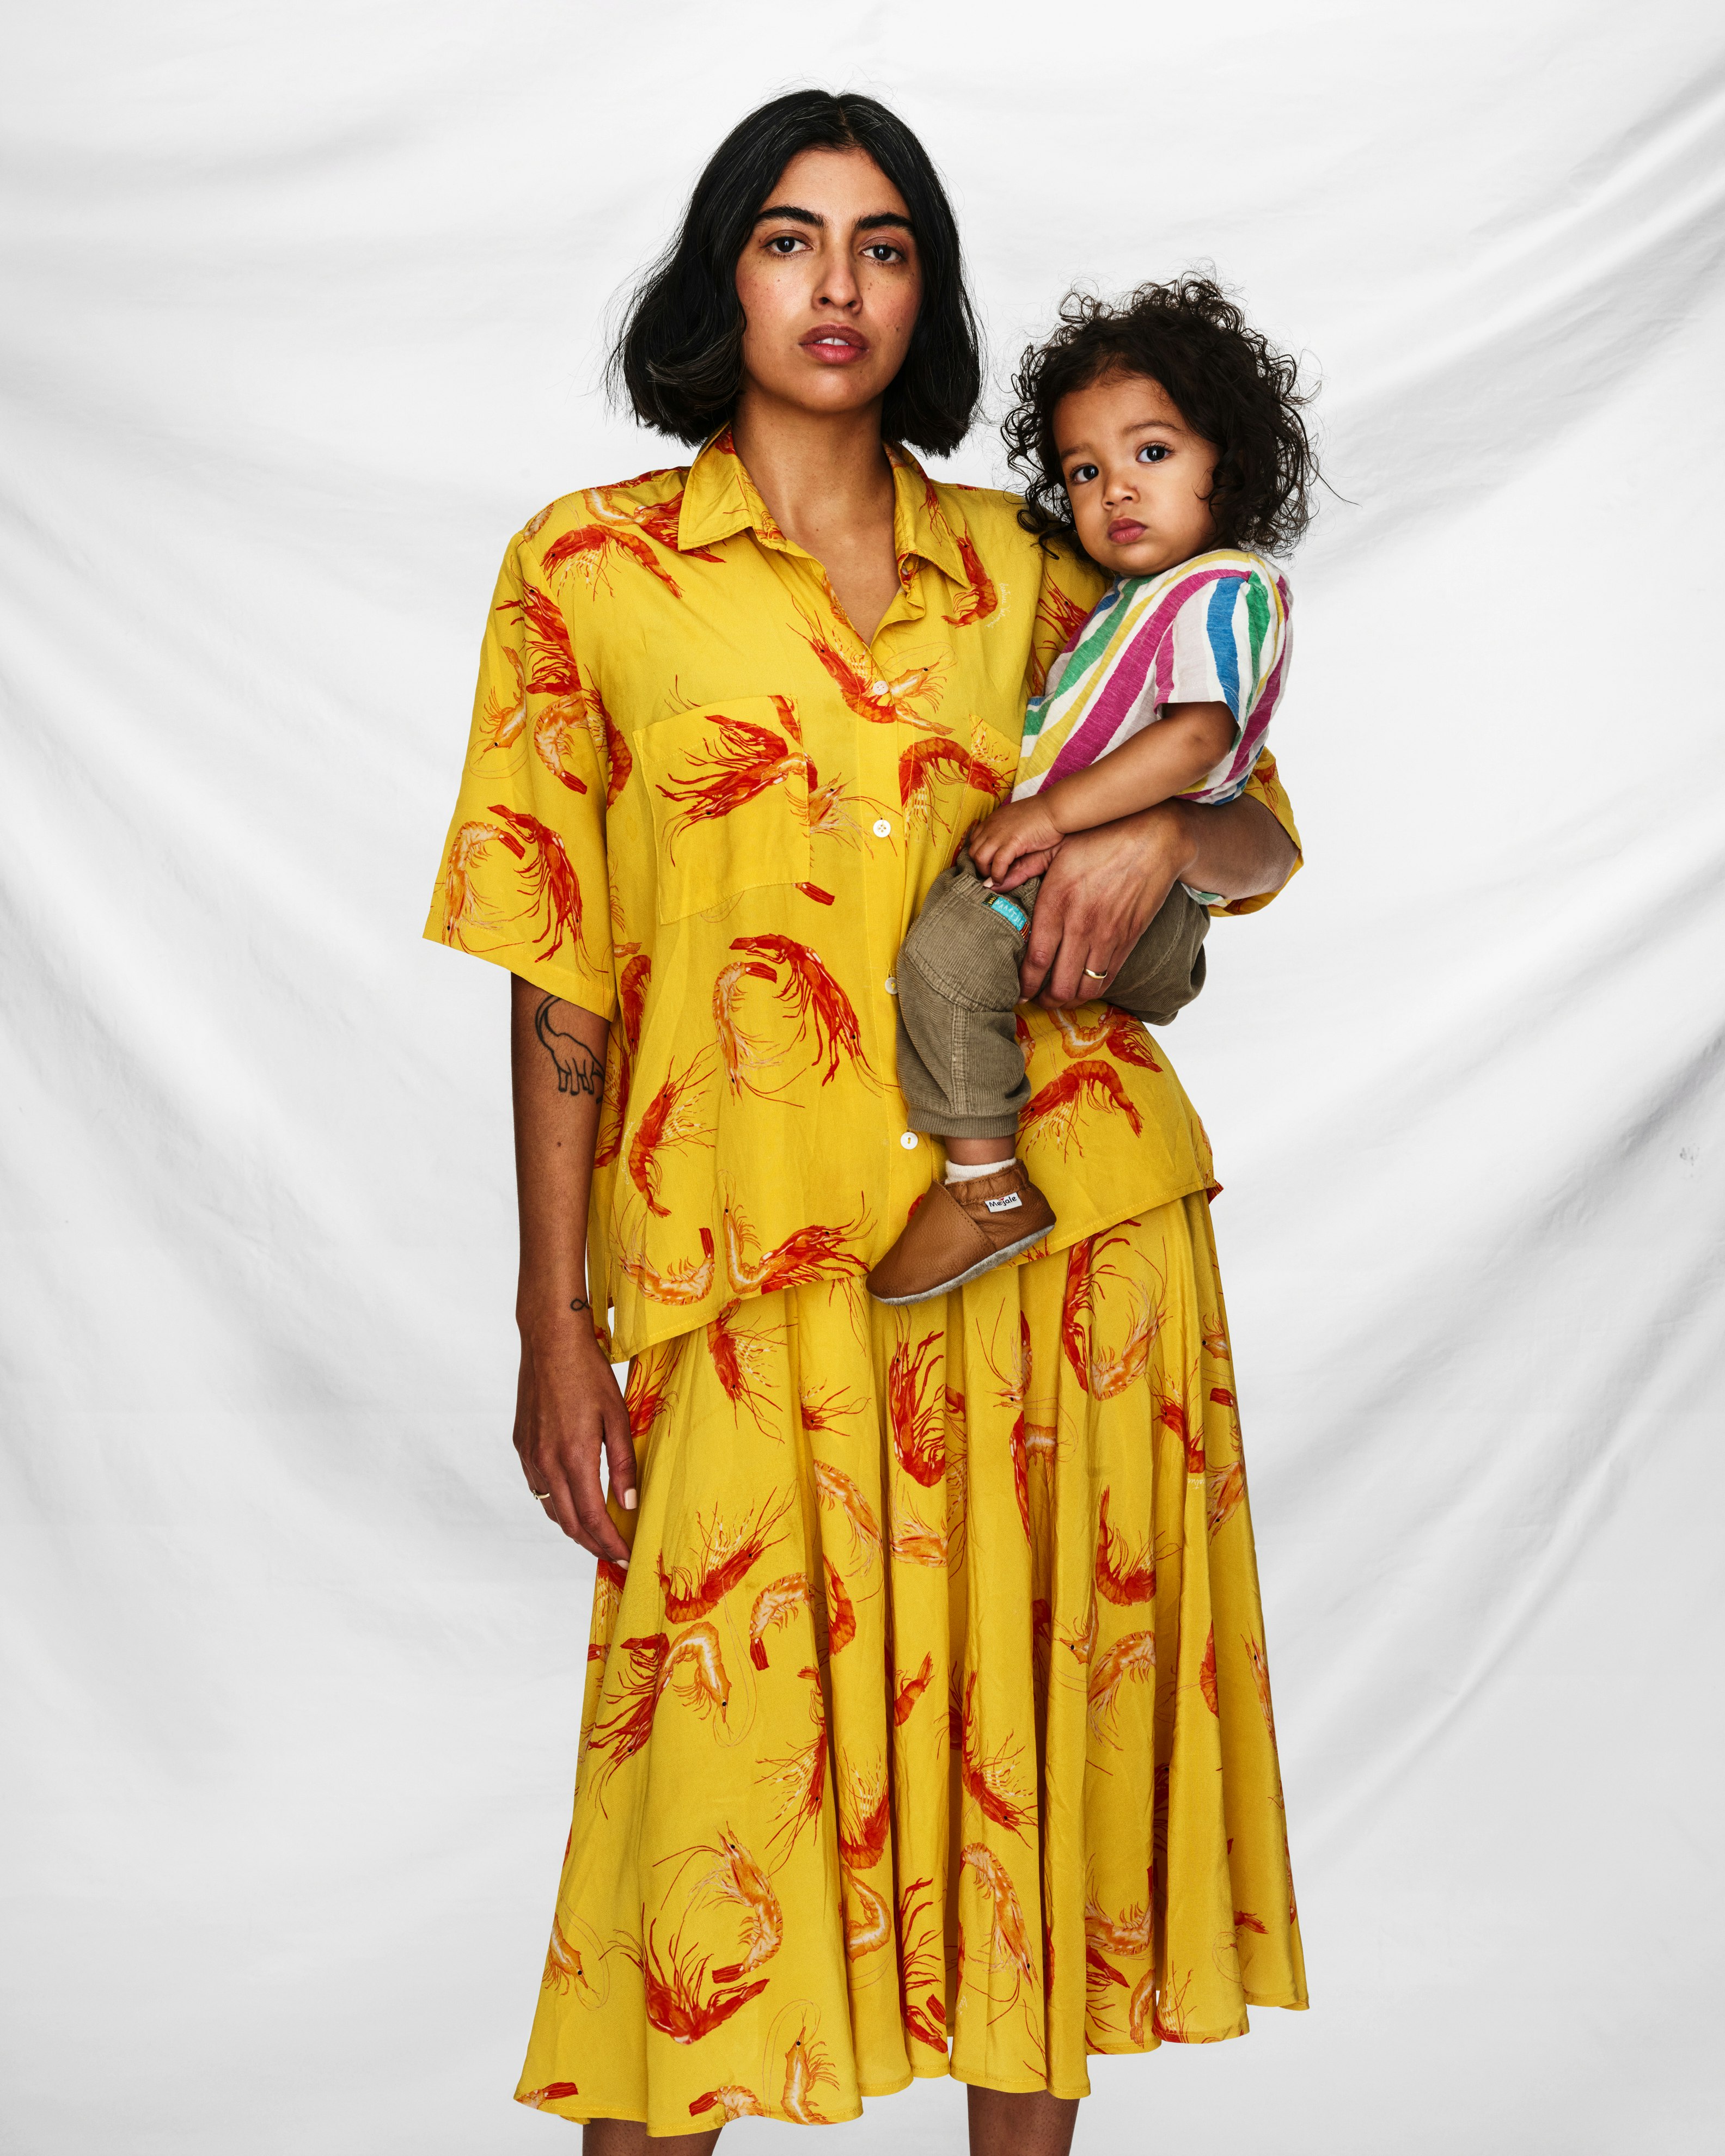 Person wearing a yellow dress with shrimp print, carrying a child, posed in front of a white cloth backdrop.